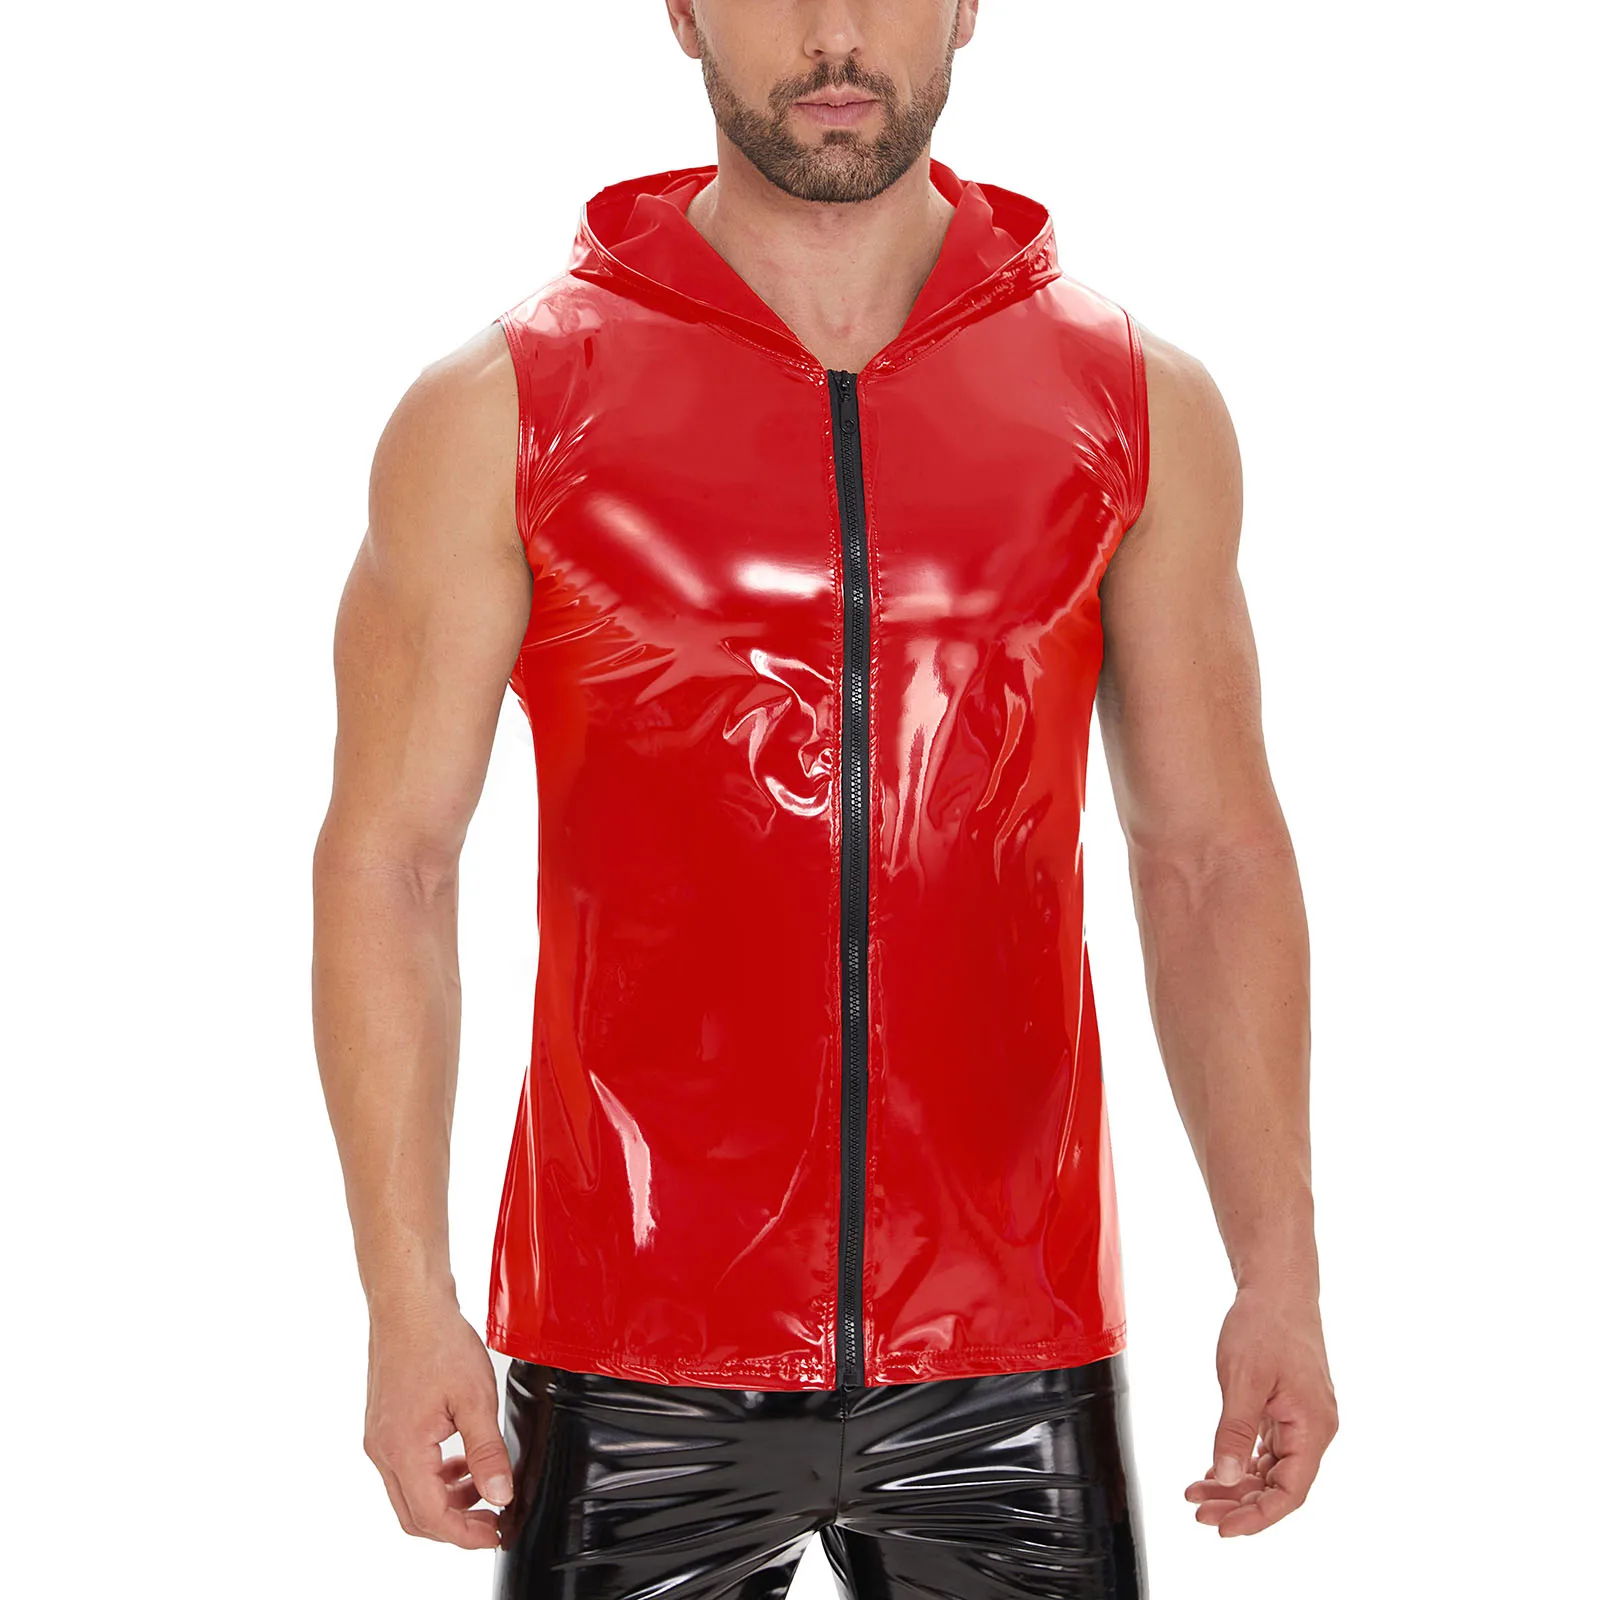 

S-7XL Plus Size Mens Wetlook Leather Shirt Hooded Full Zipper Tank Tops Sleeveless Male Shaping Stand Collar Fashion T-shirts